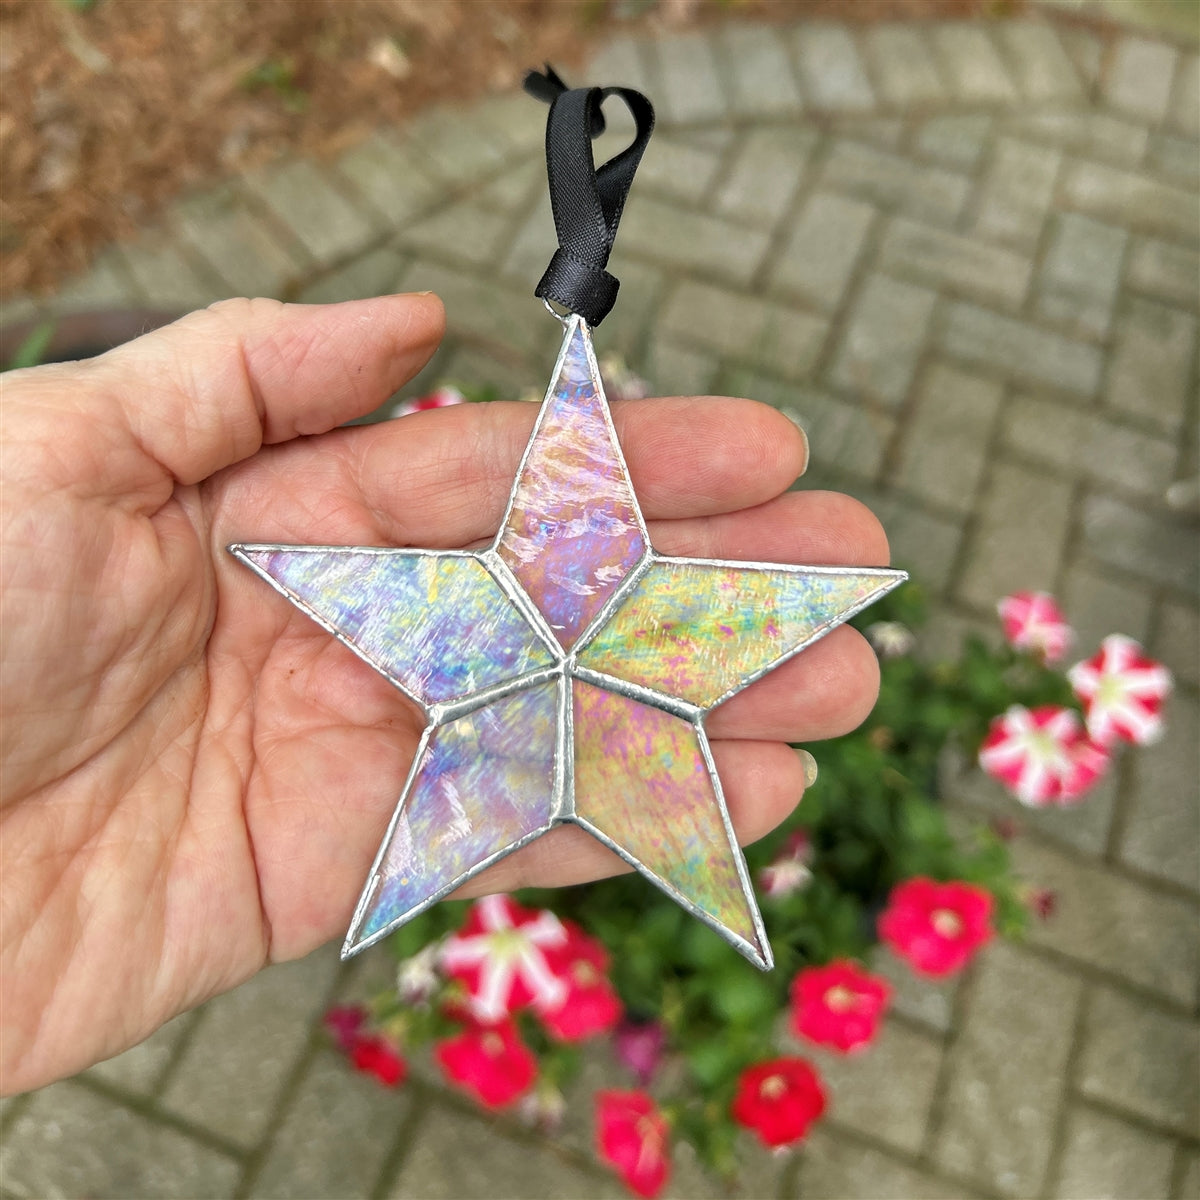 Christian God Shines: Warrior Stained Glass Star